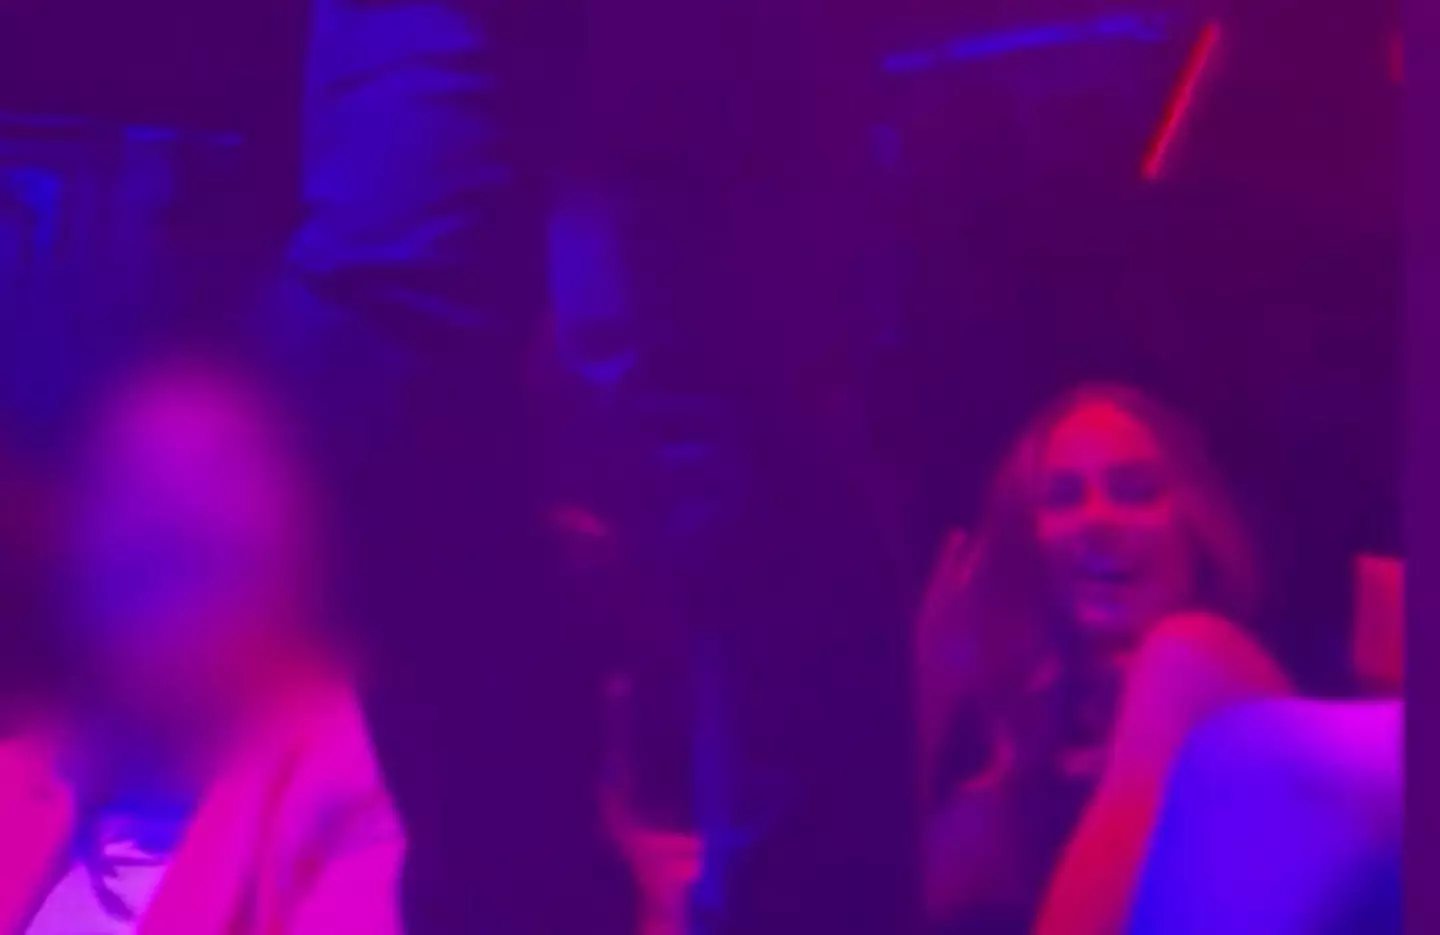 Margot was spotted at the Magic Mike show (